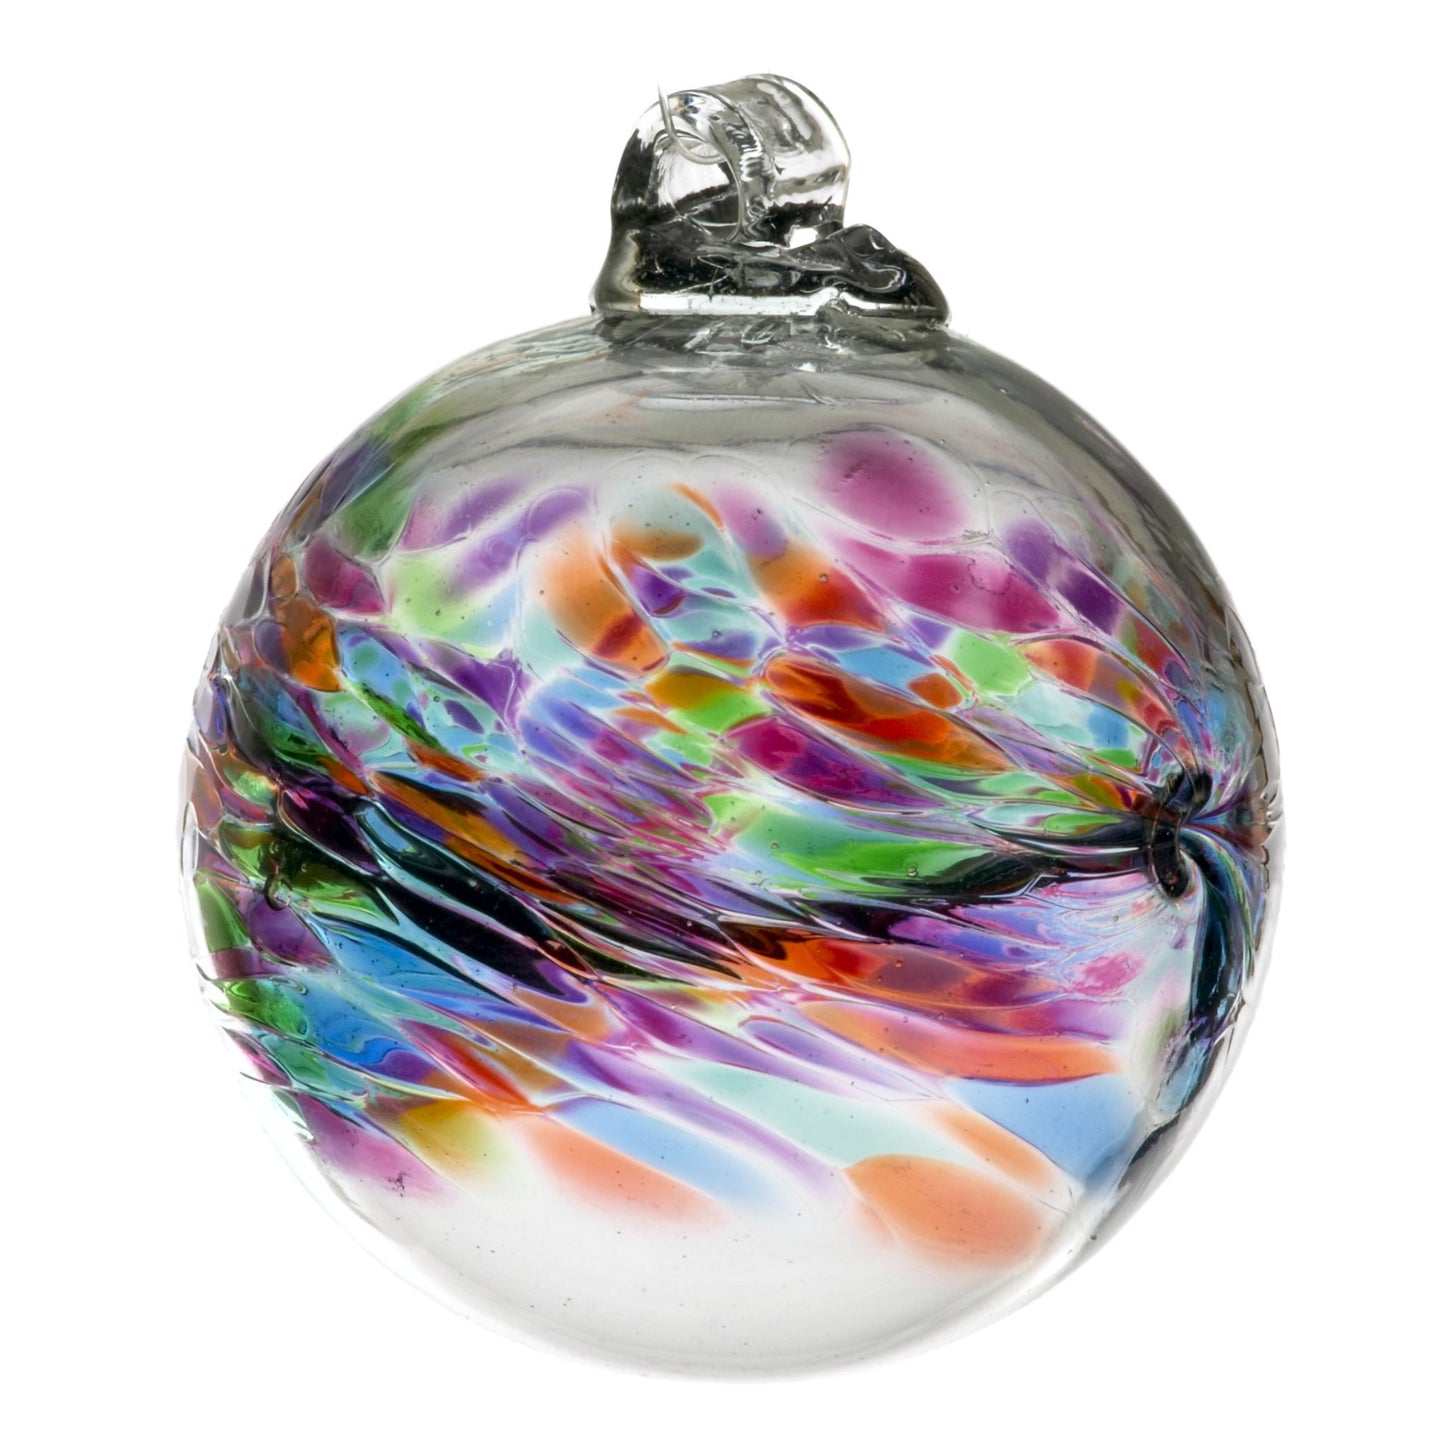 March Glass Orb 2"